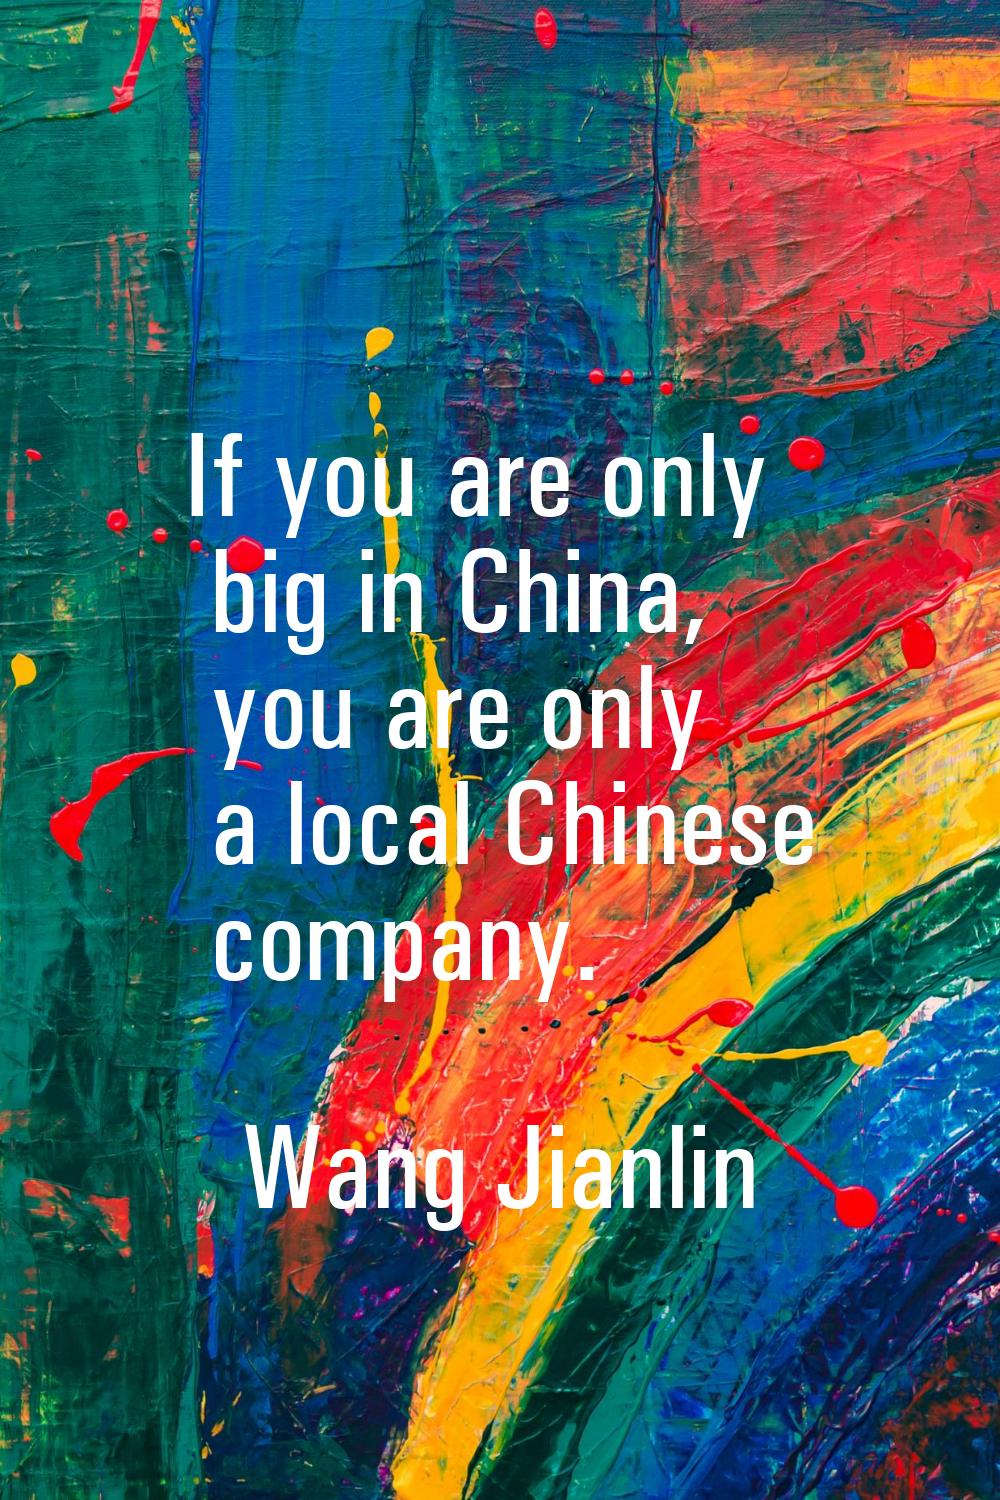 If you are only big in China, you are only a local Chinese company.